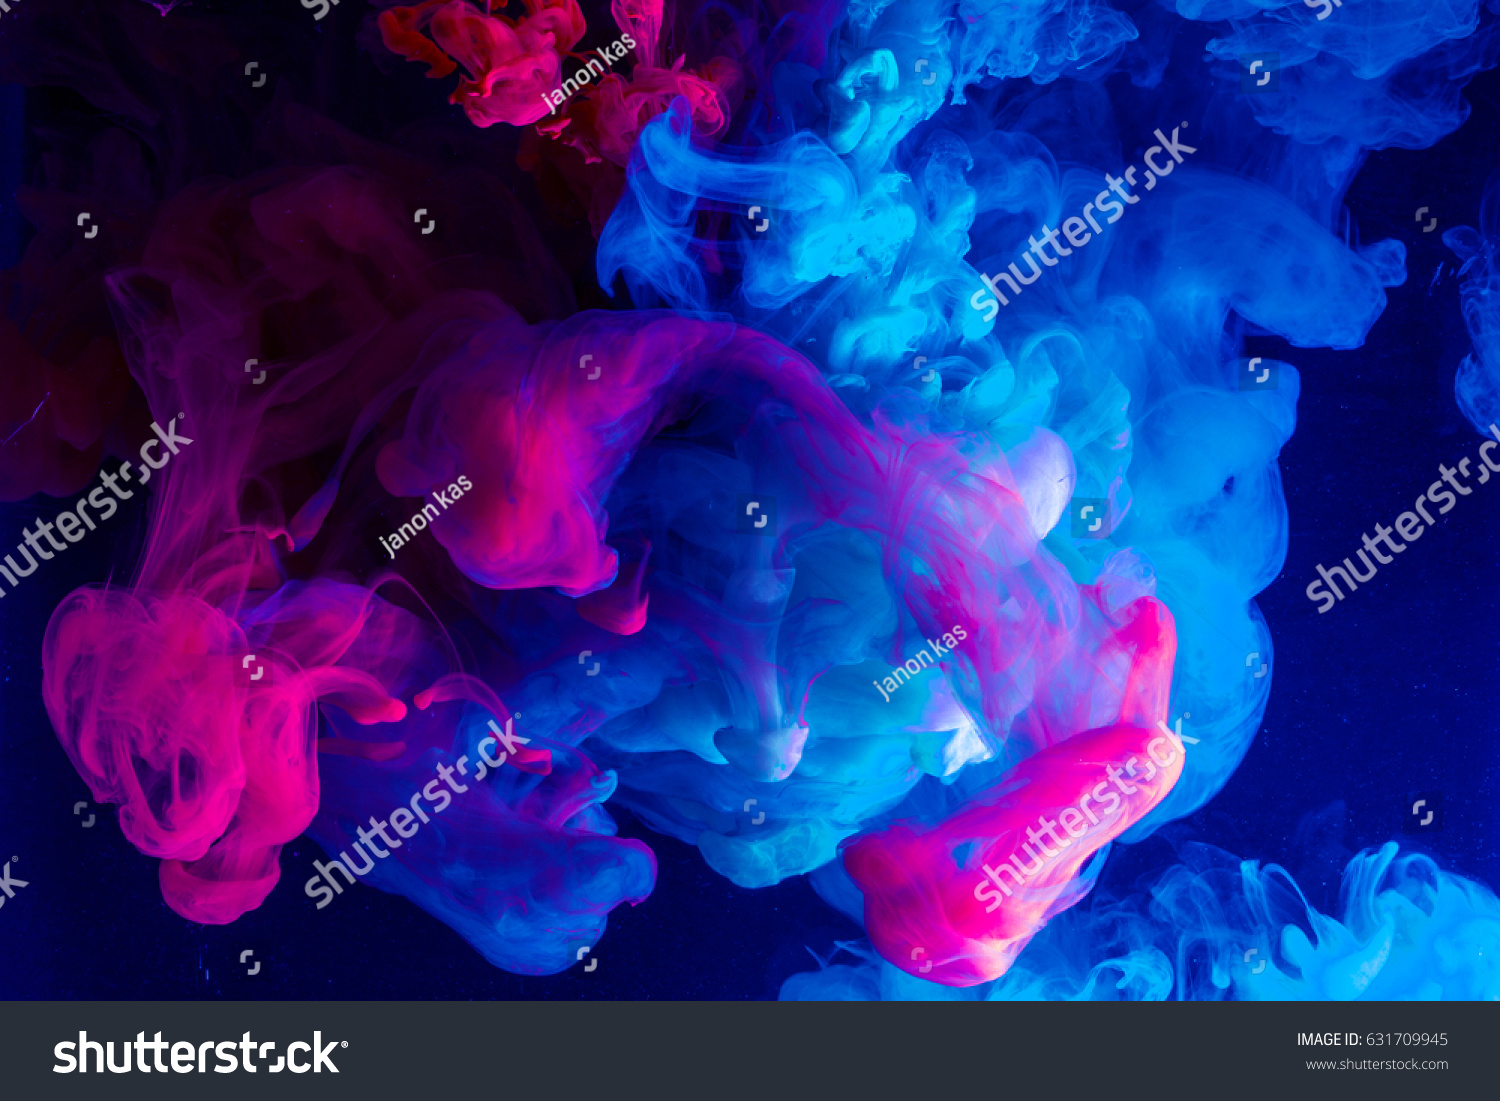 Motion Color drop in water,Ink swirling in ,Colorful ink abstraction.Fancy Dream Cloud of ink under water #631709945